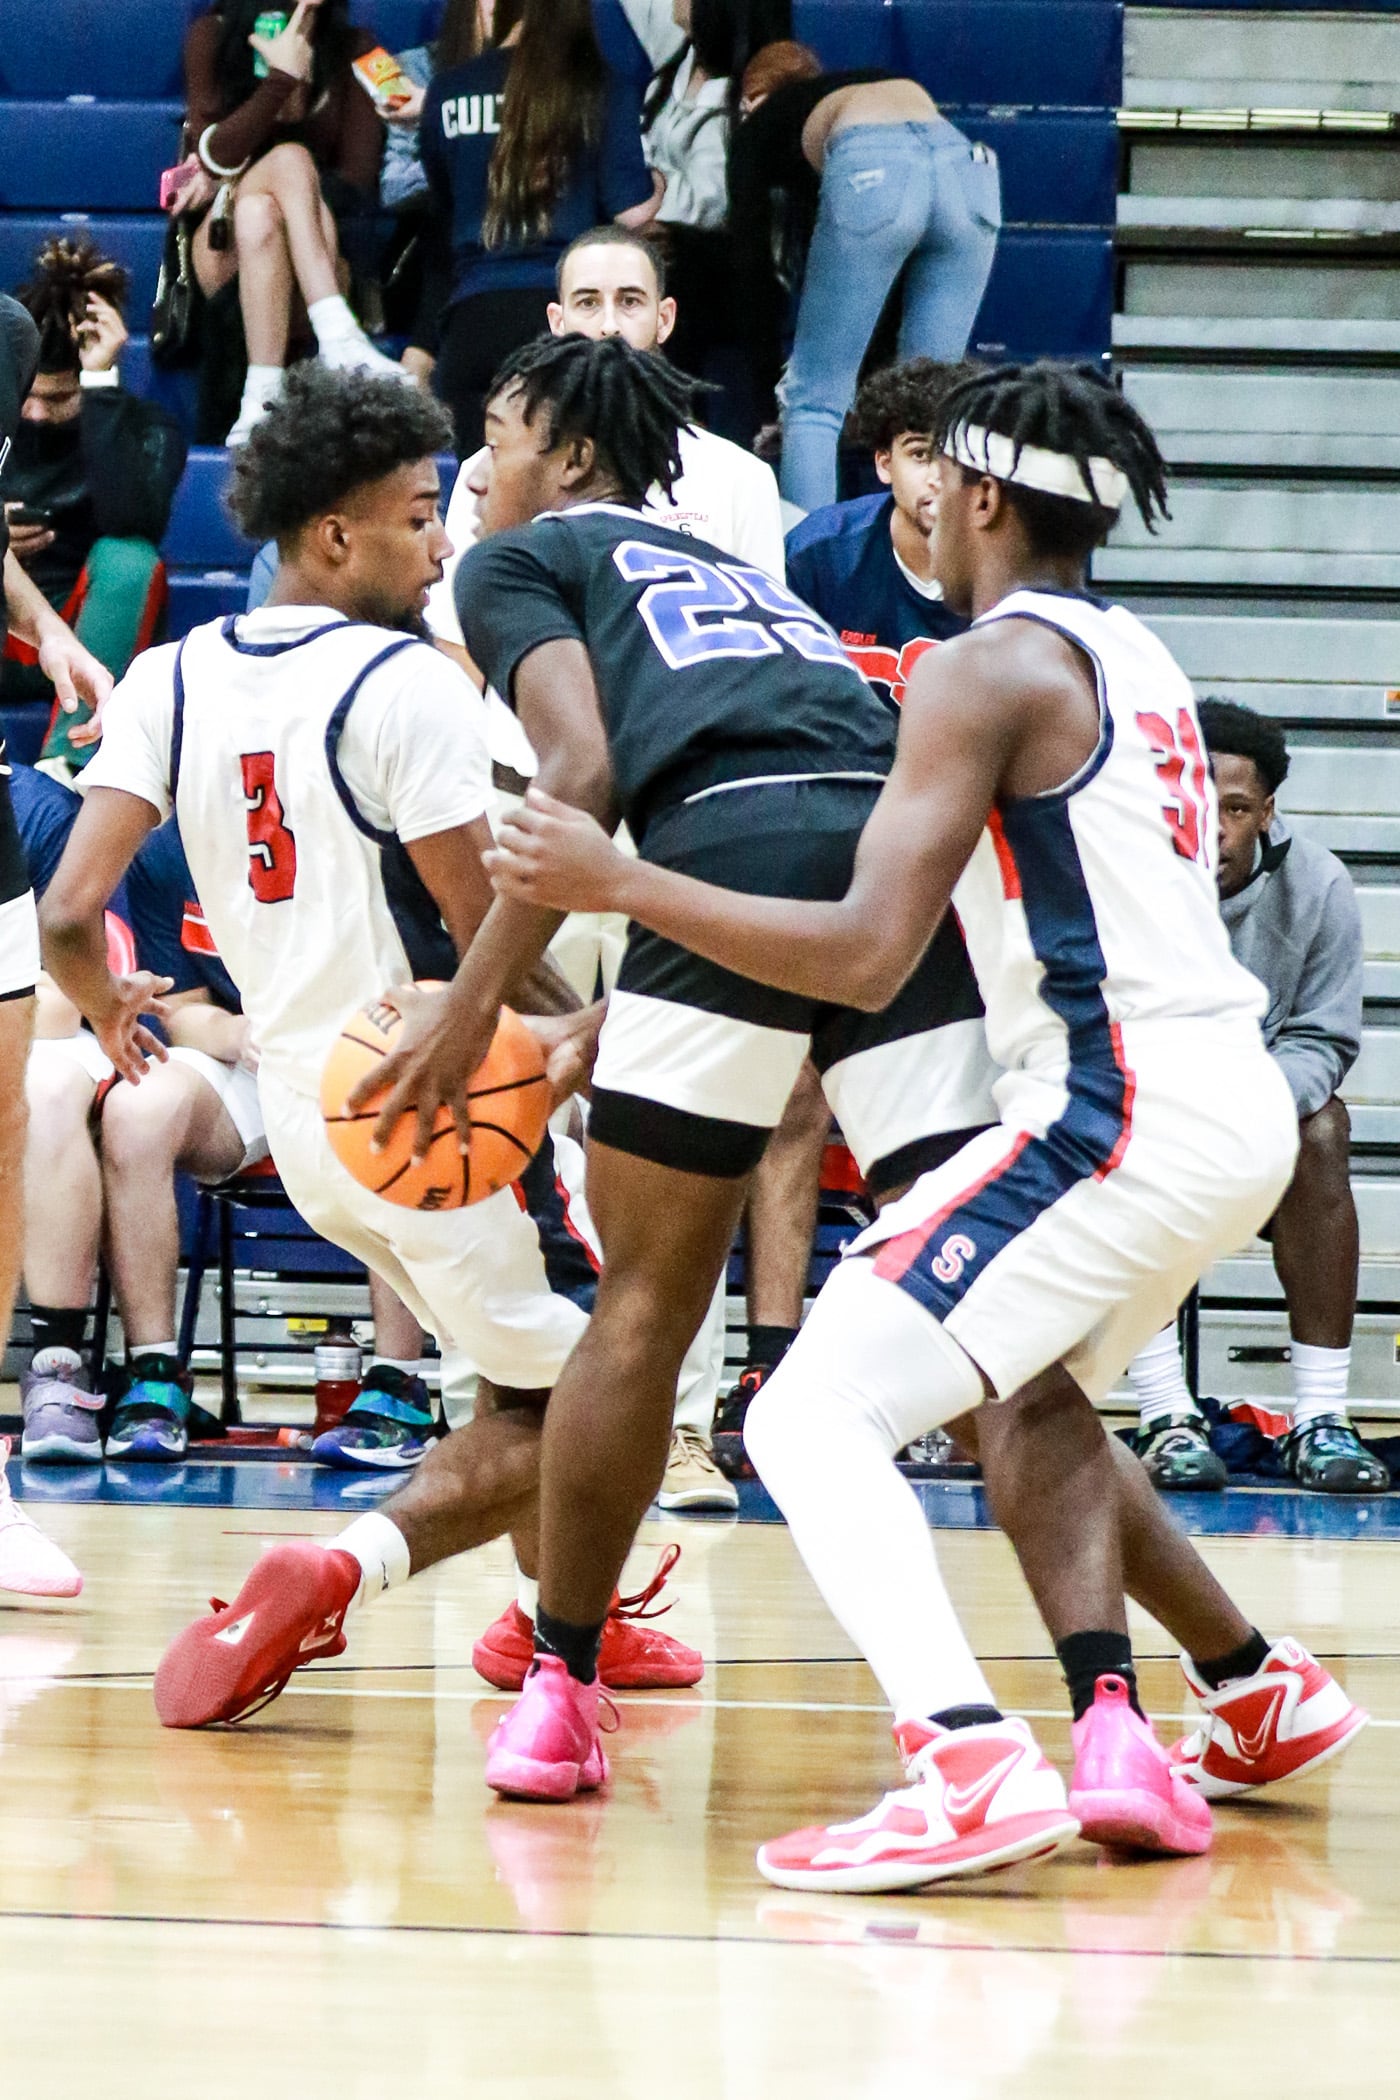 Thursday night 12/1 Eagles #3 Senior Divine Torain and #31 So. Zion McKenzie on defense to get control of ball from Central #25 Junior Tykel Williams. Photo by Cheryl Clanton.